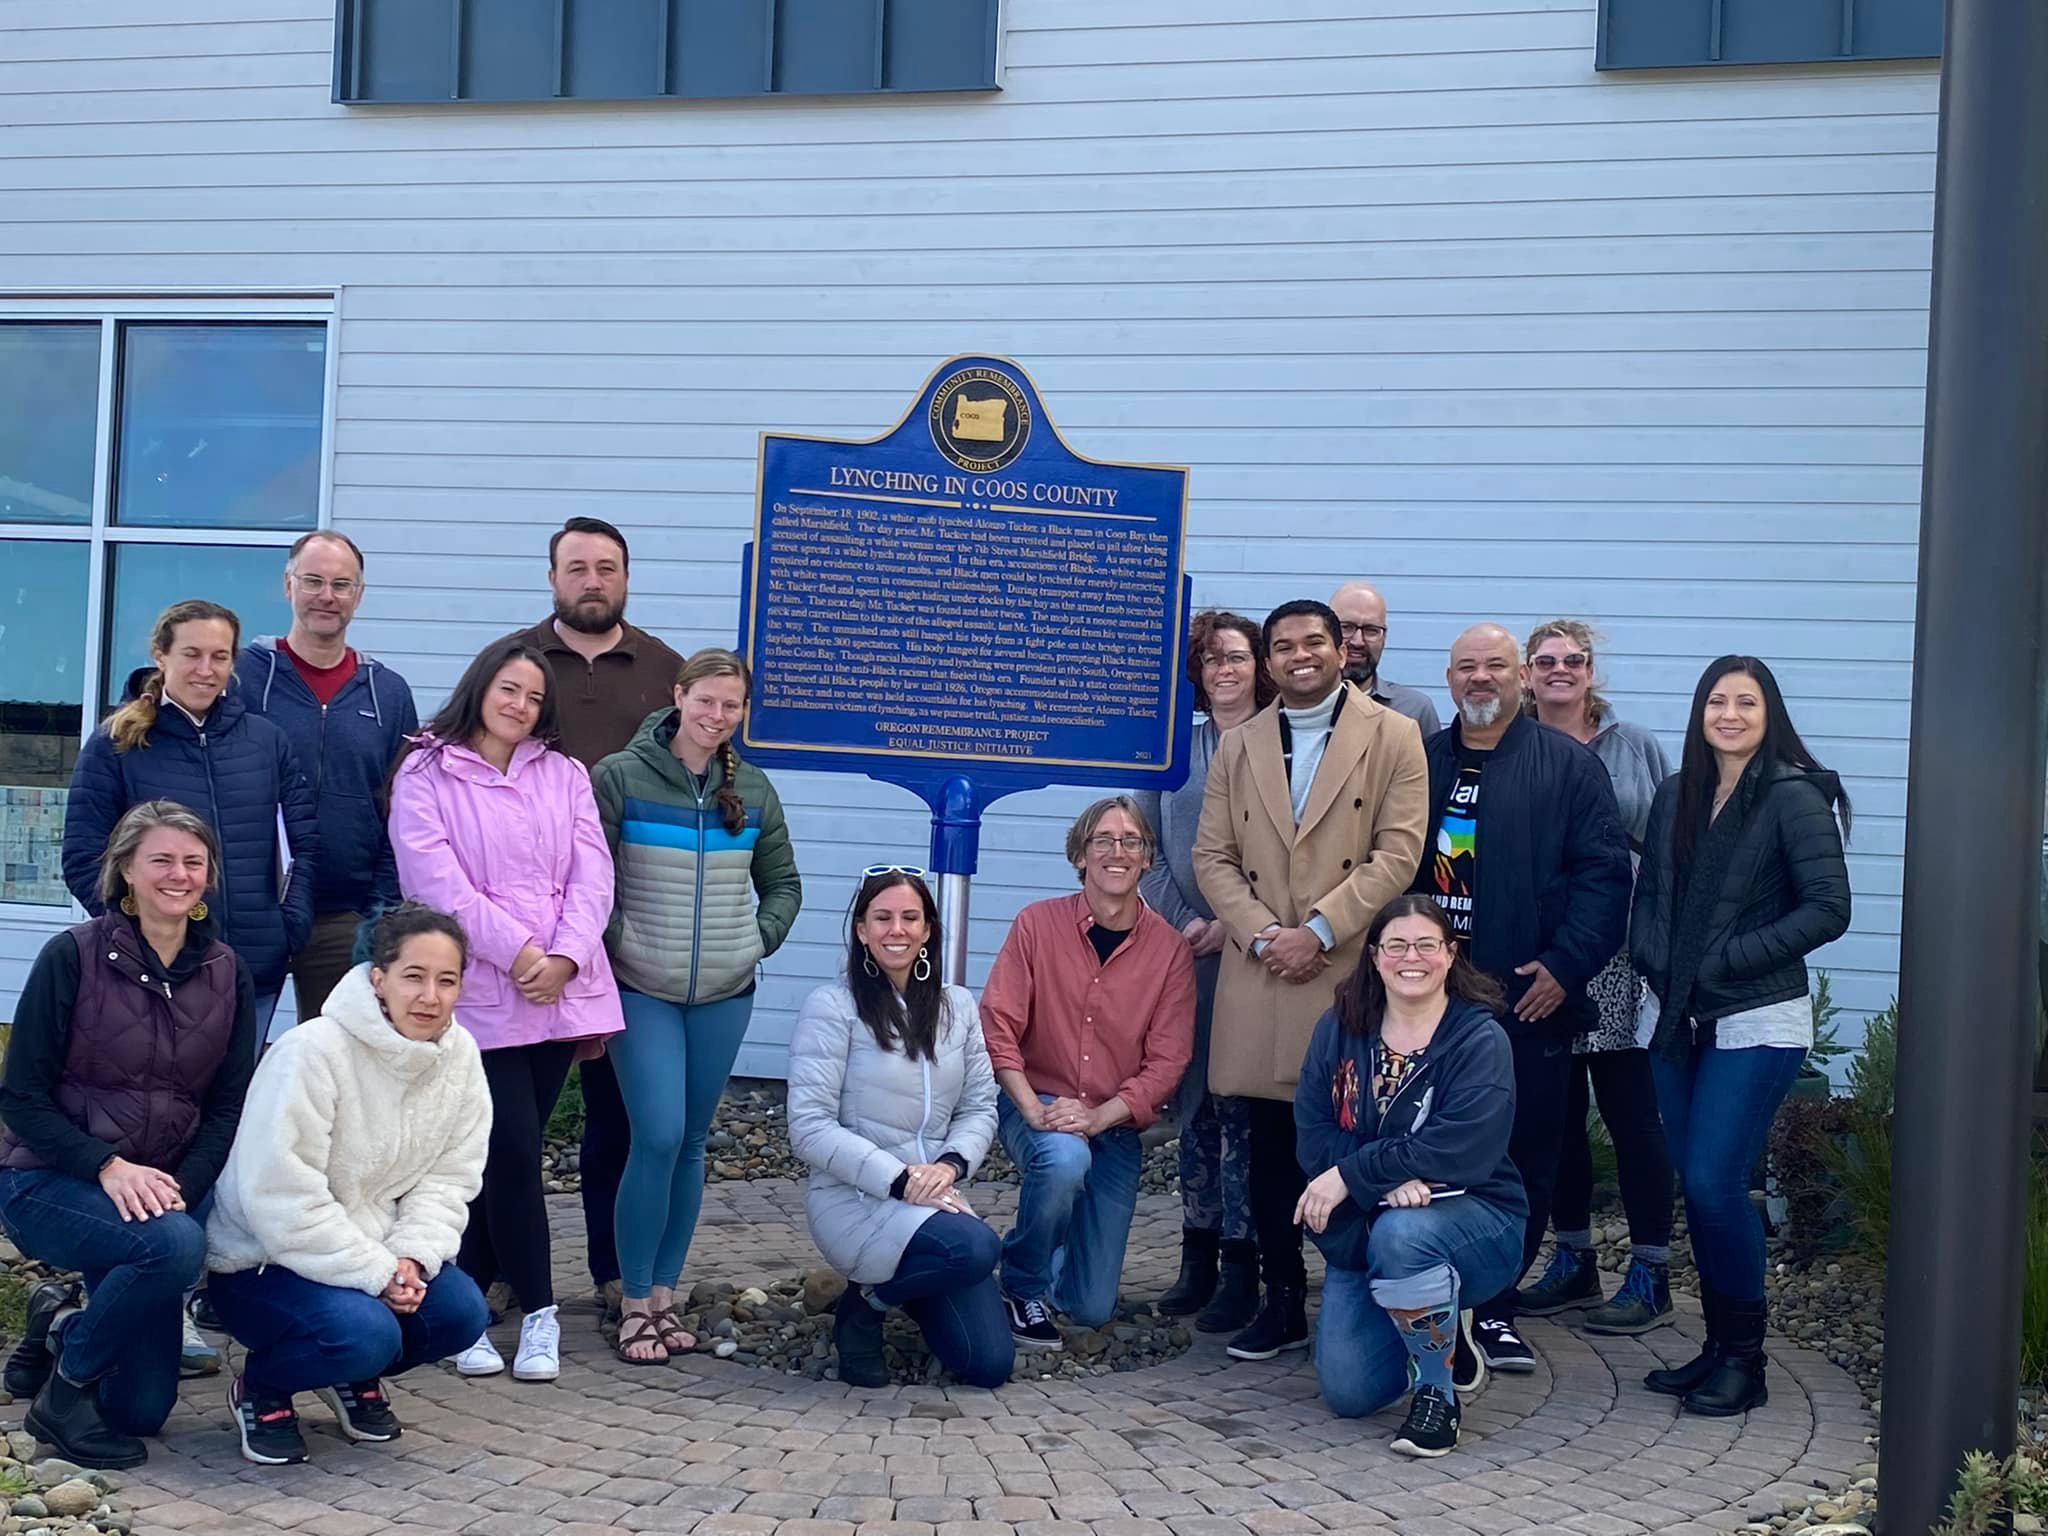 Coos Bay workshop participants posing outside of Coos Museum, where the memorial for Alonzo Tucker is located.